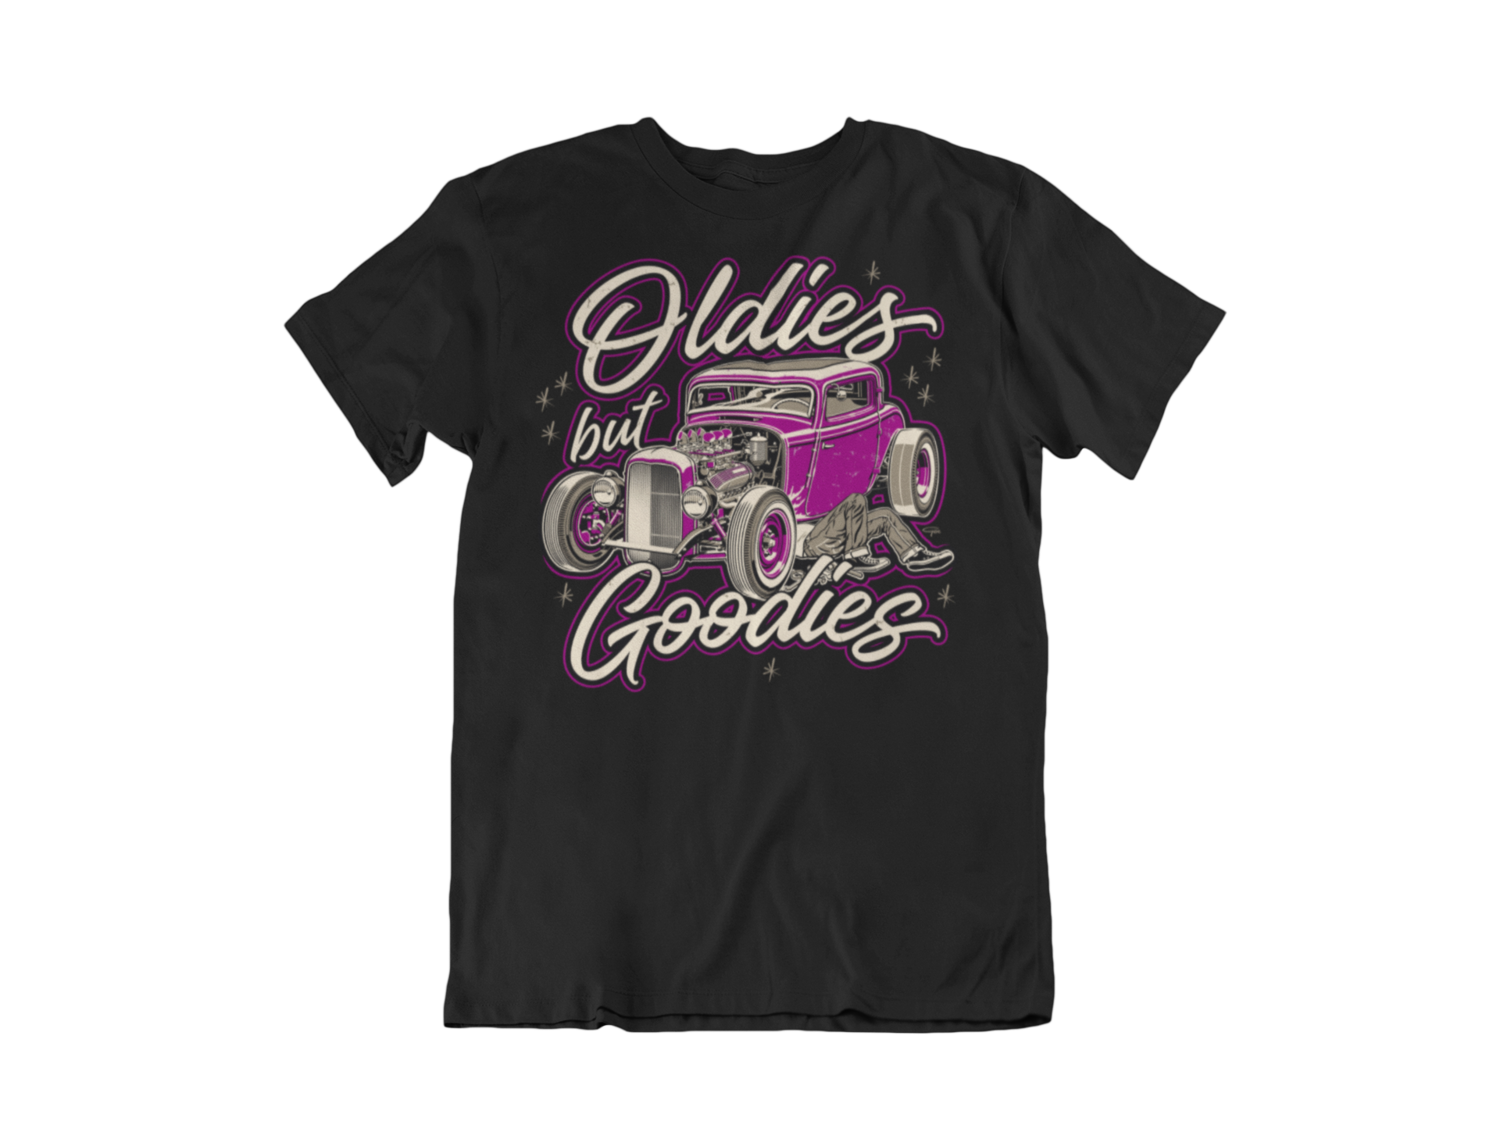 OLDIES BUT GOODIES T-SHIRT MAN BY Ger "Dutch Courage" Peters artwork